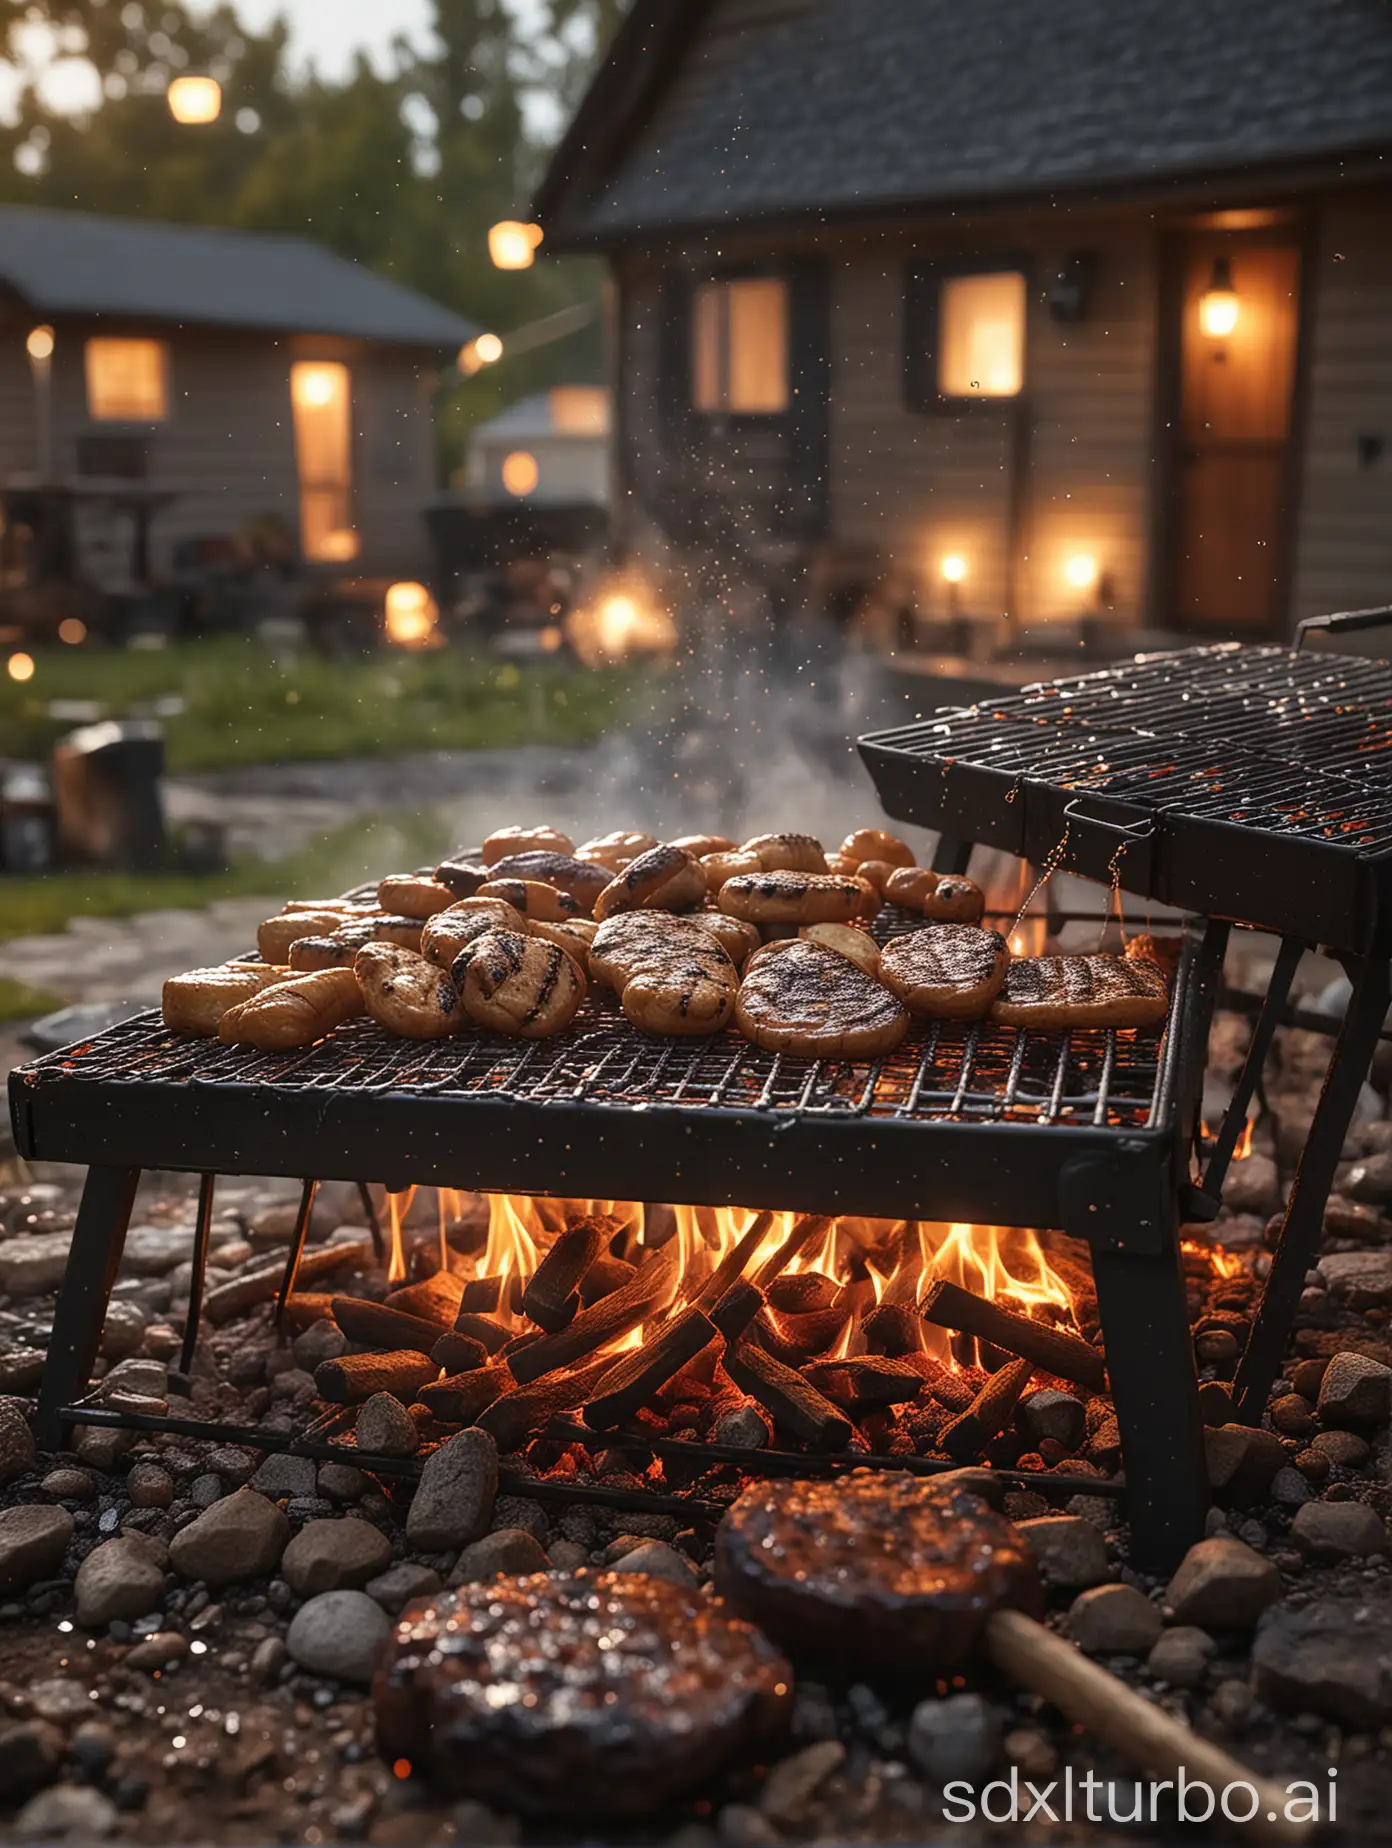 HyperRealistic-Backyard-Barbecue-Grill-Photography-with-Dramatic-Lighting-and-Evening-Ambiance